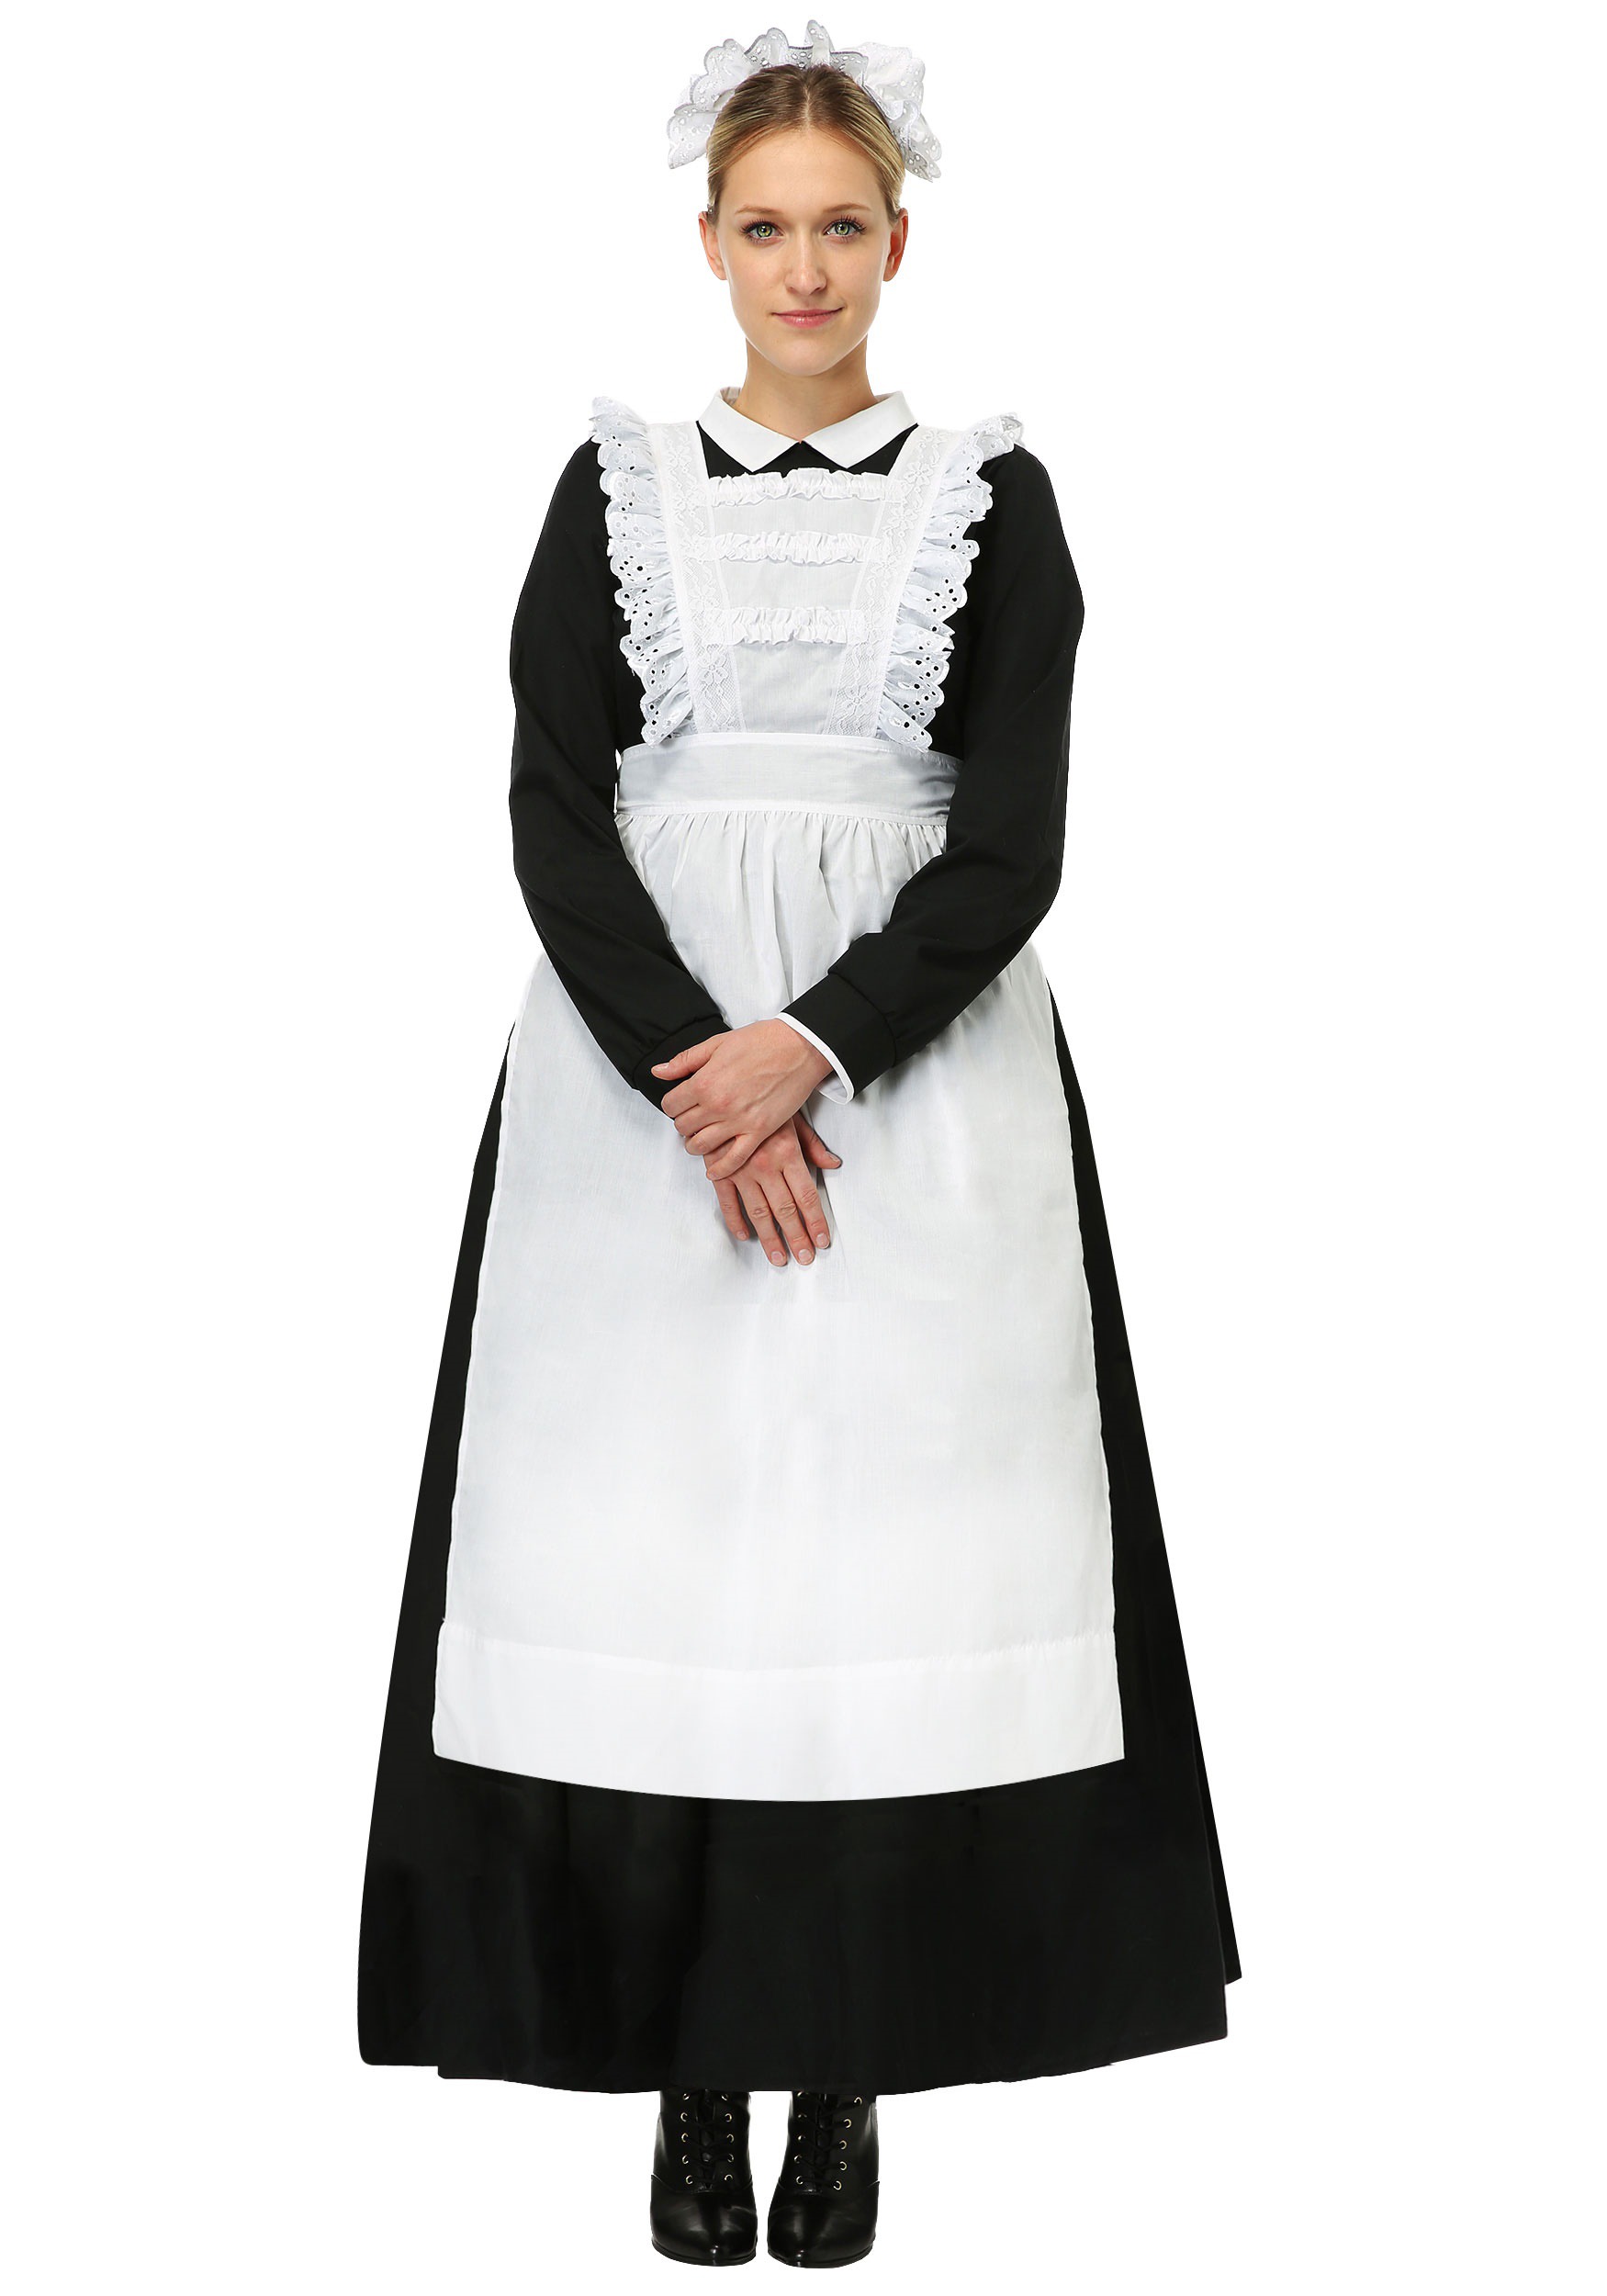 Image of Traditional Maid Costume for Women ID FUN1520AD-XL